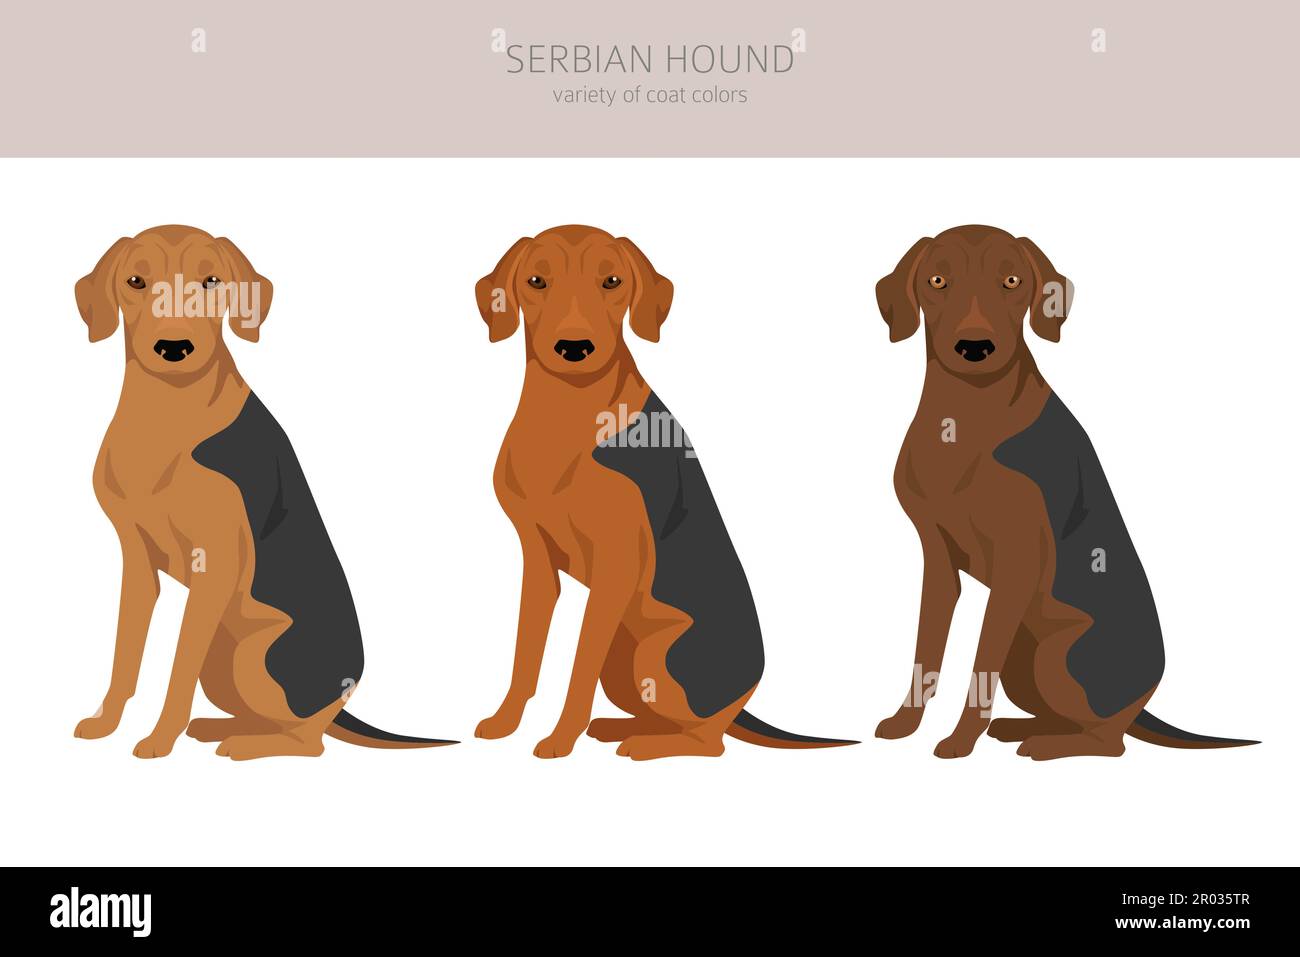 Serbian Hound clipart. All coat colors set.  All dog breeds characteristics infographic. Vector illustration Stock Vector